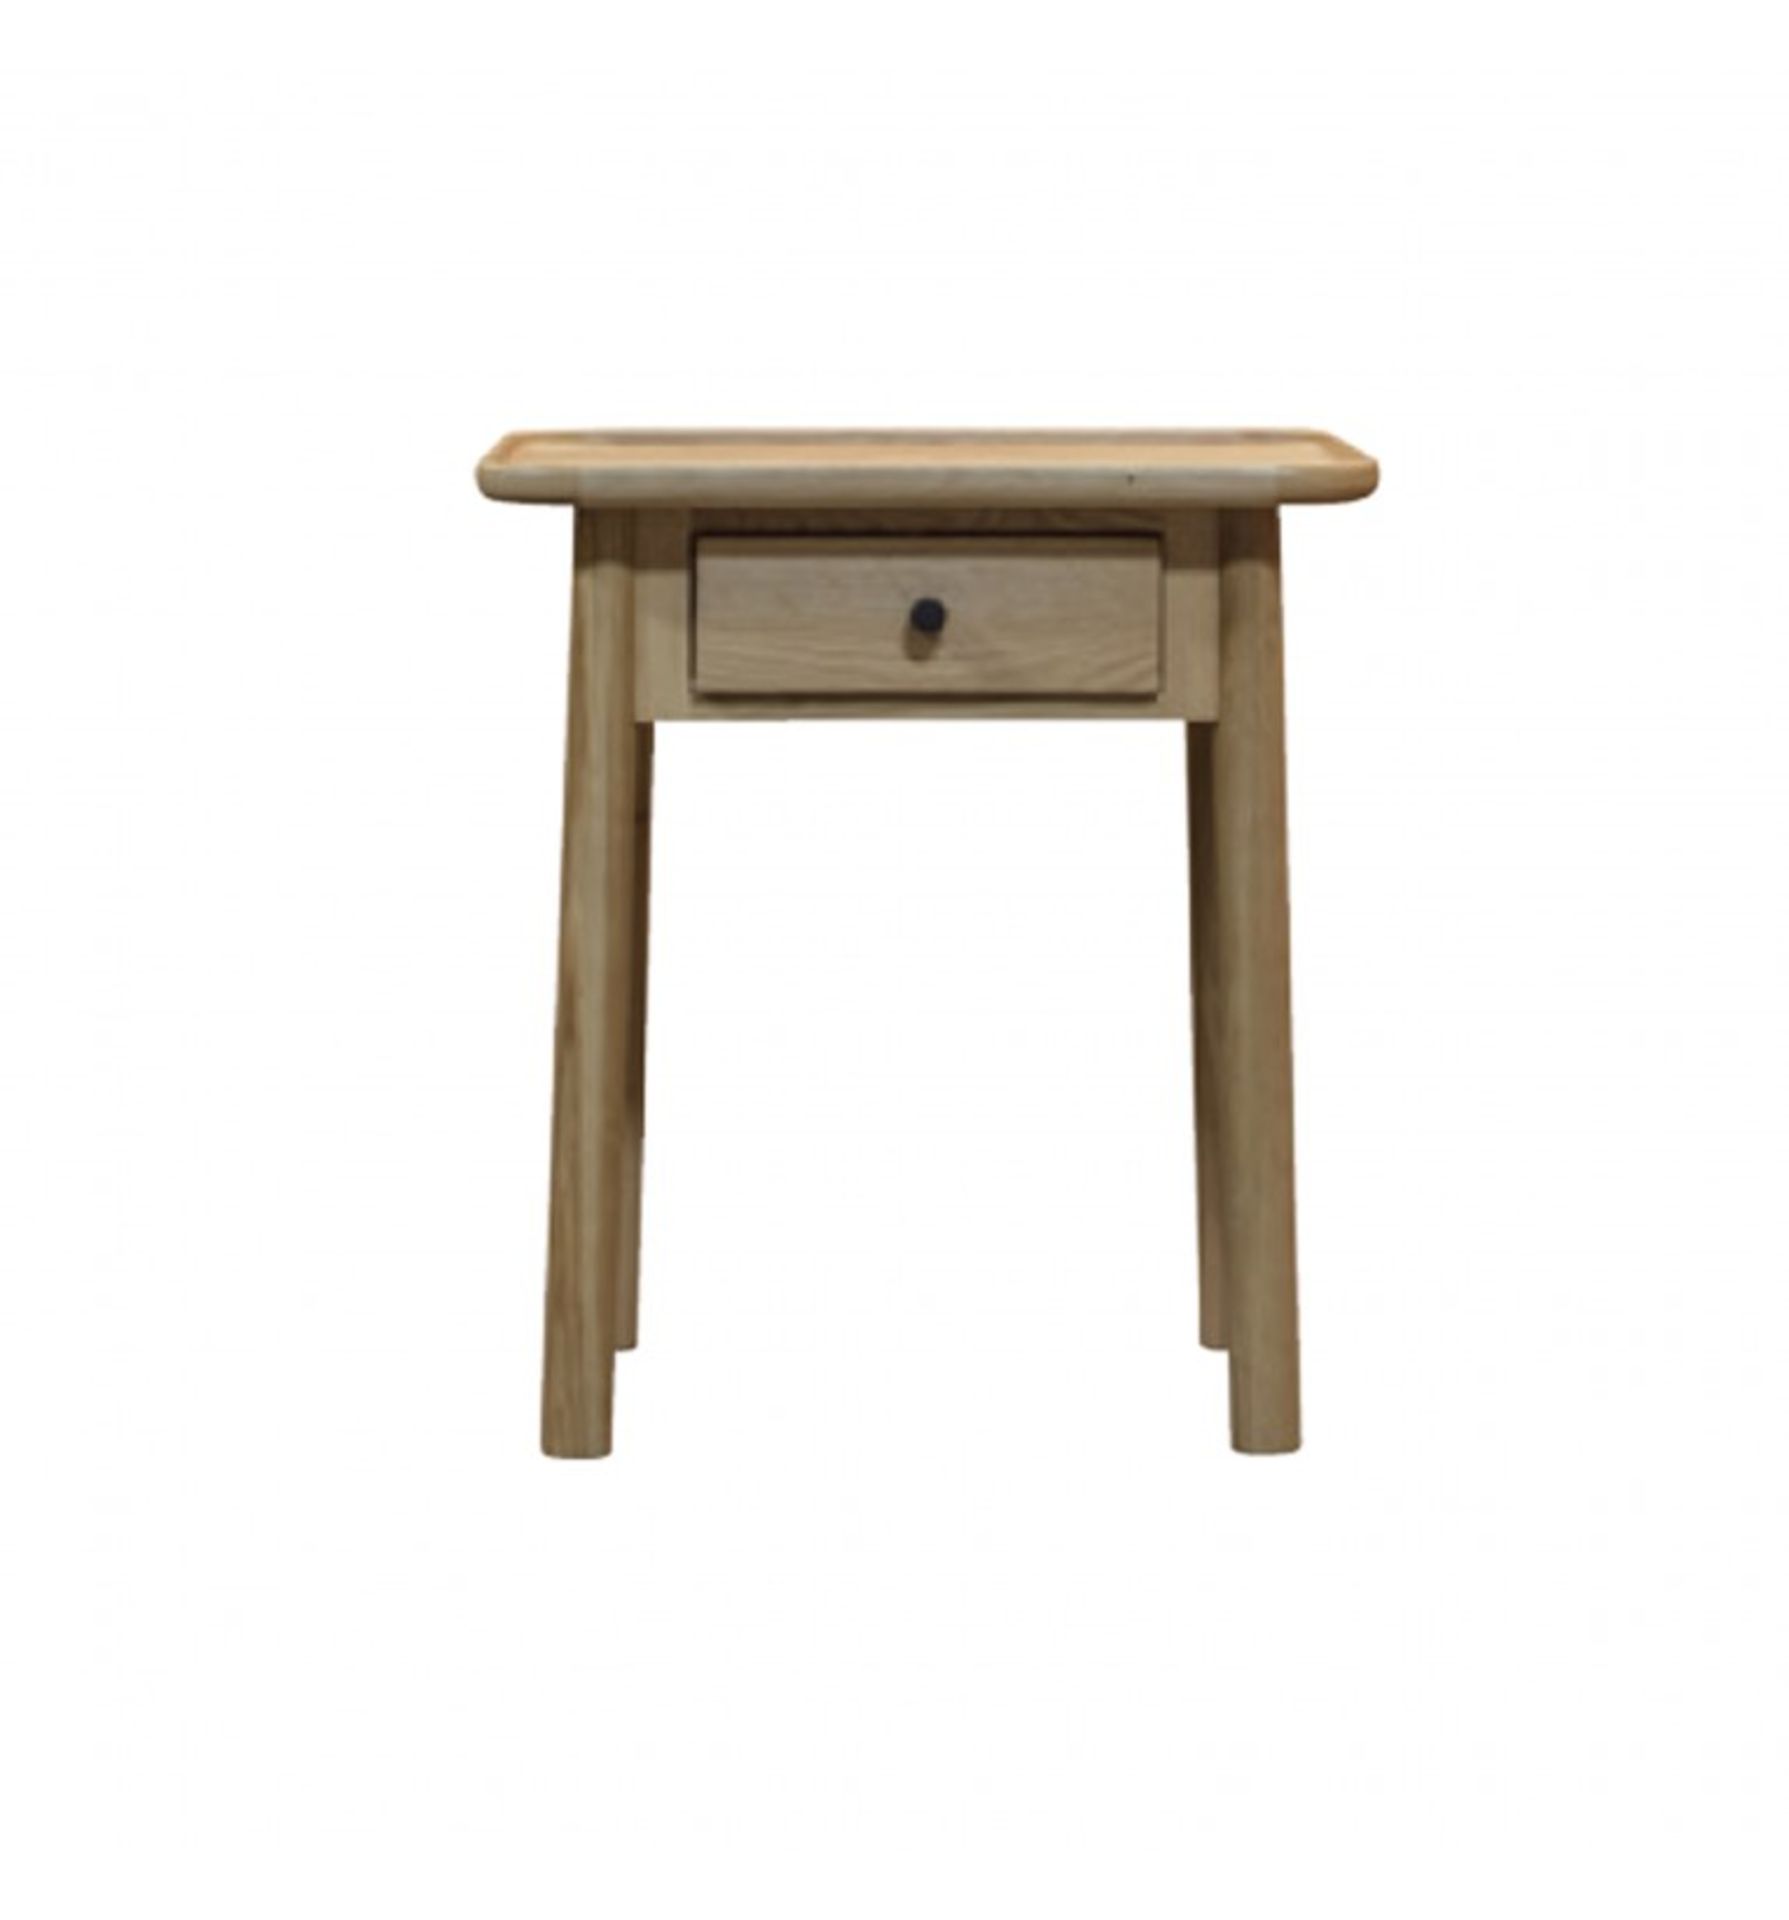 Kingham 1 Drawer Side Table The Kingham 1 Drawer Side Table is the latest addition to our range of